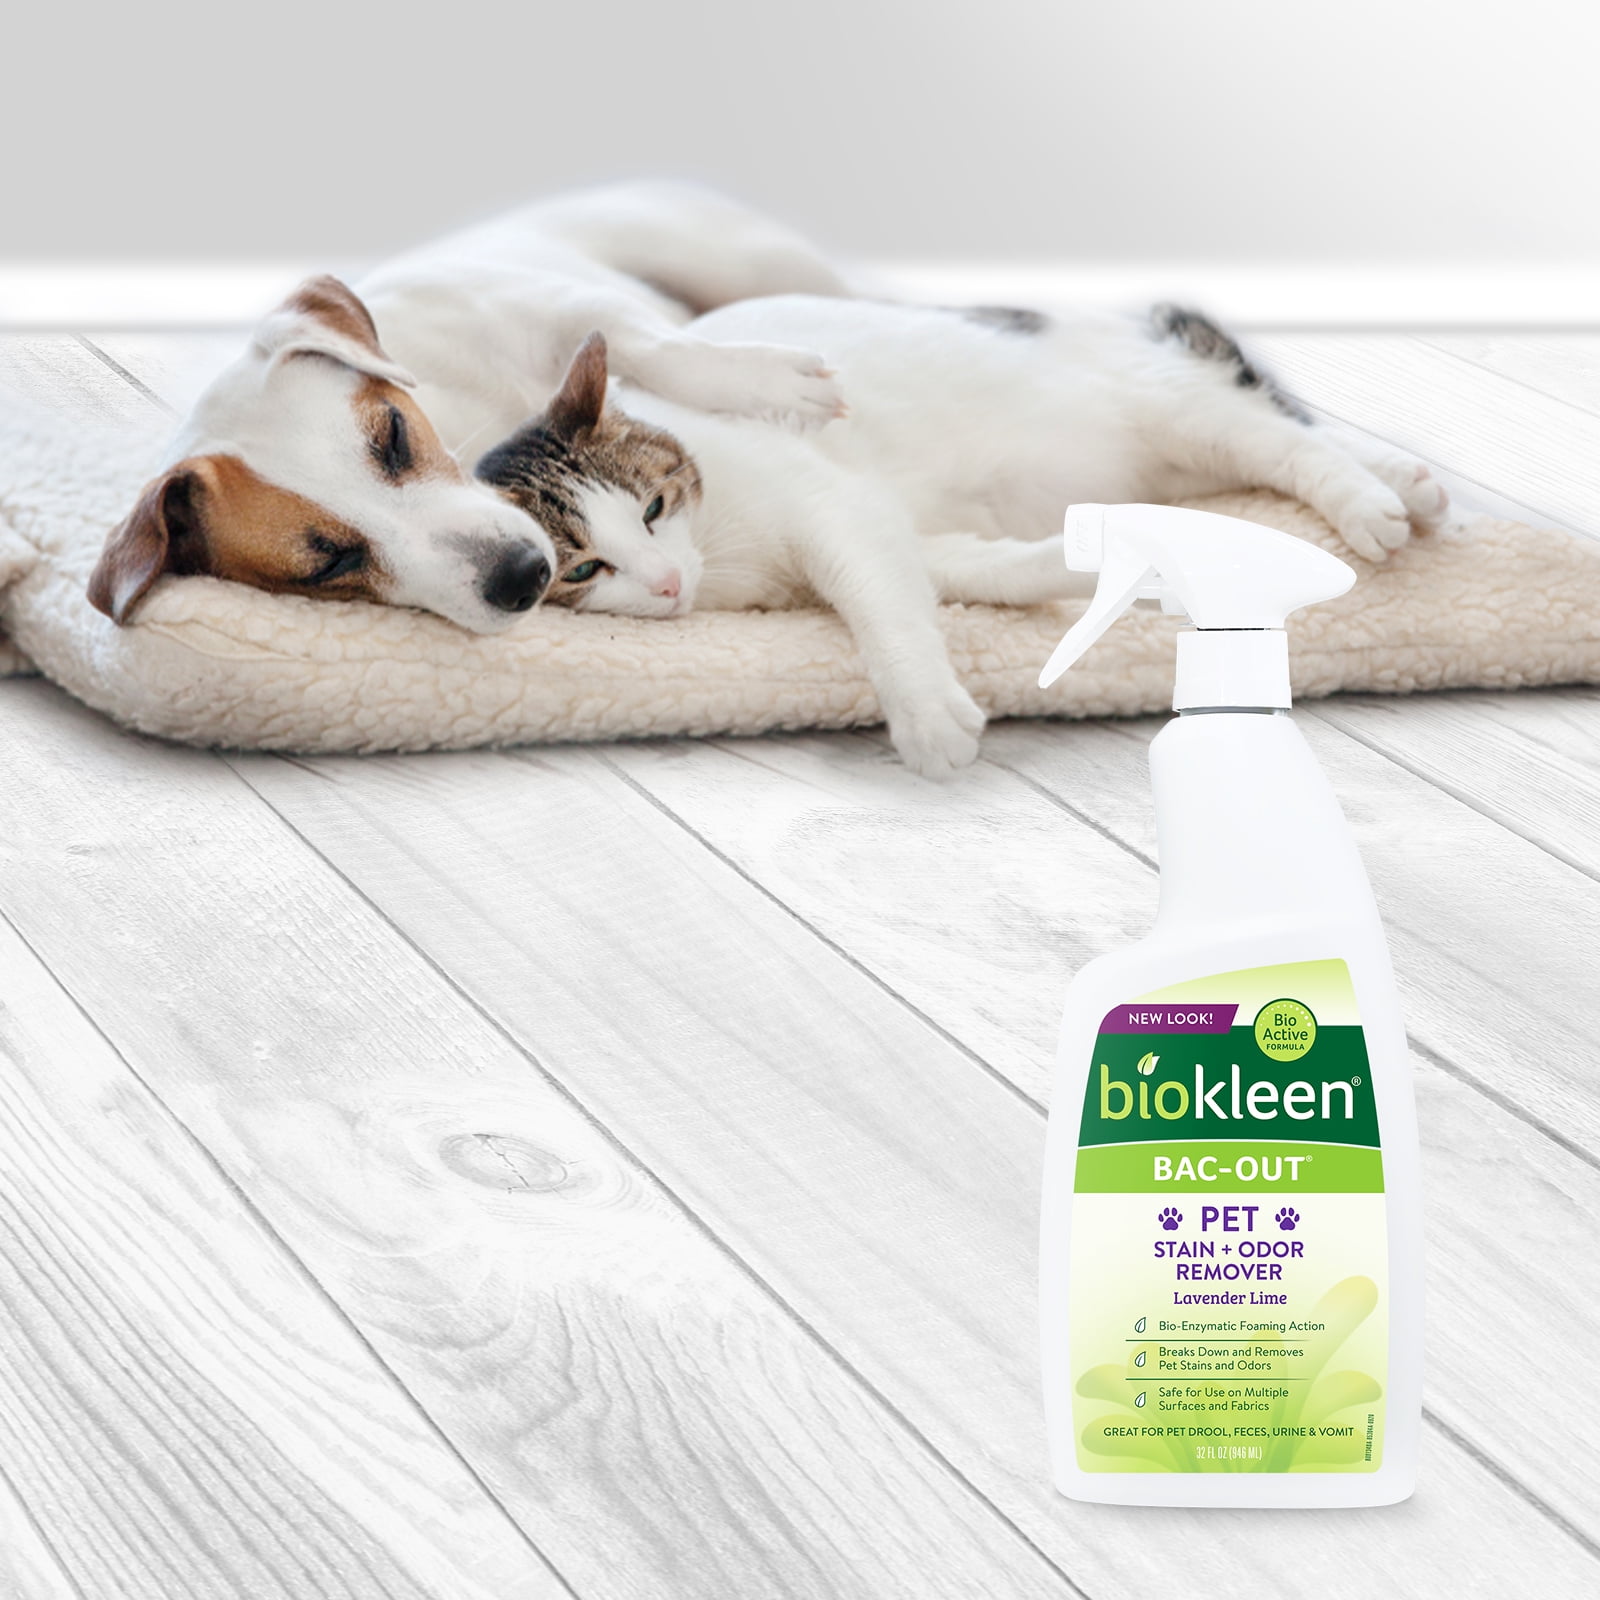 biokleen 32 oz. Bac-Out Enzymatic Carpet Stain and Odor Remover